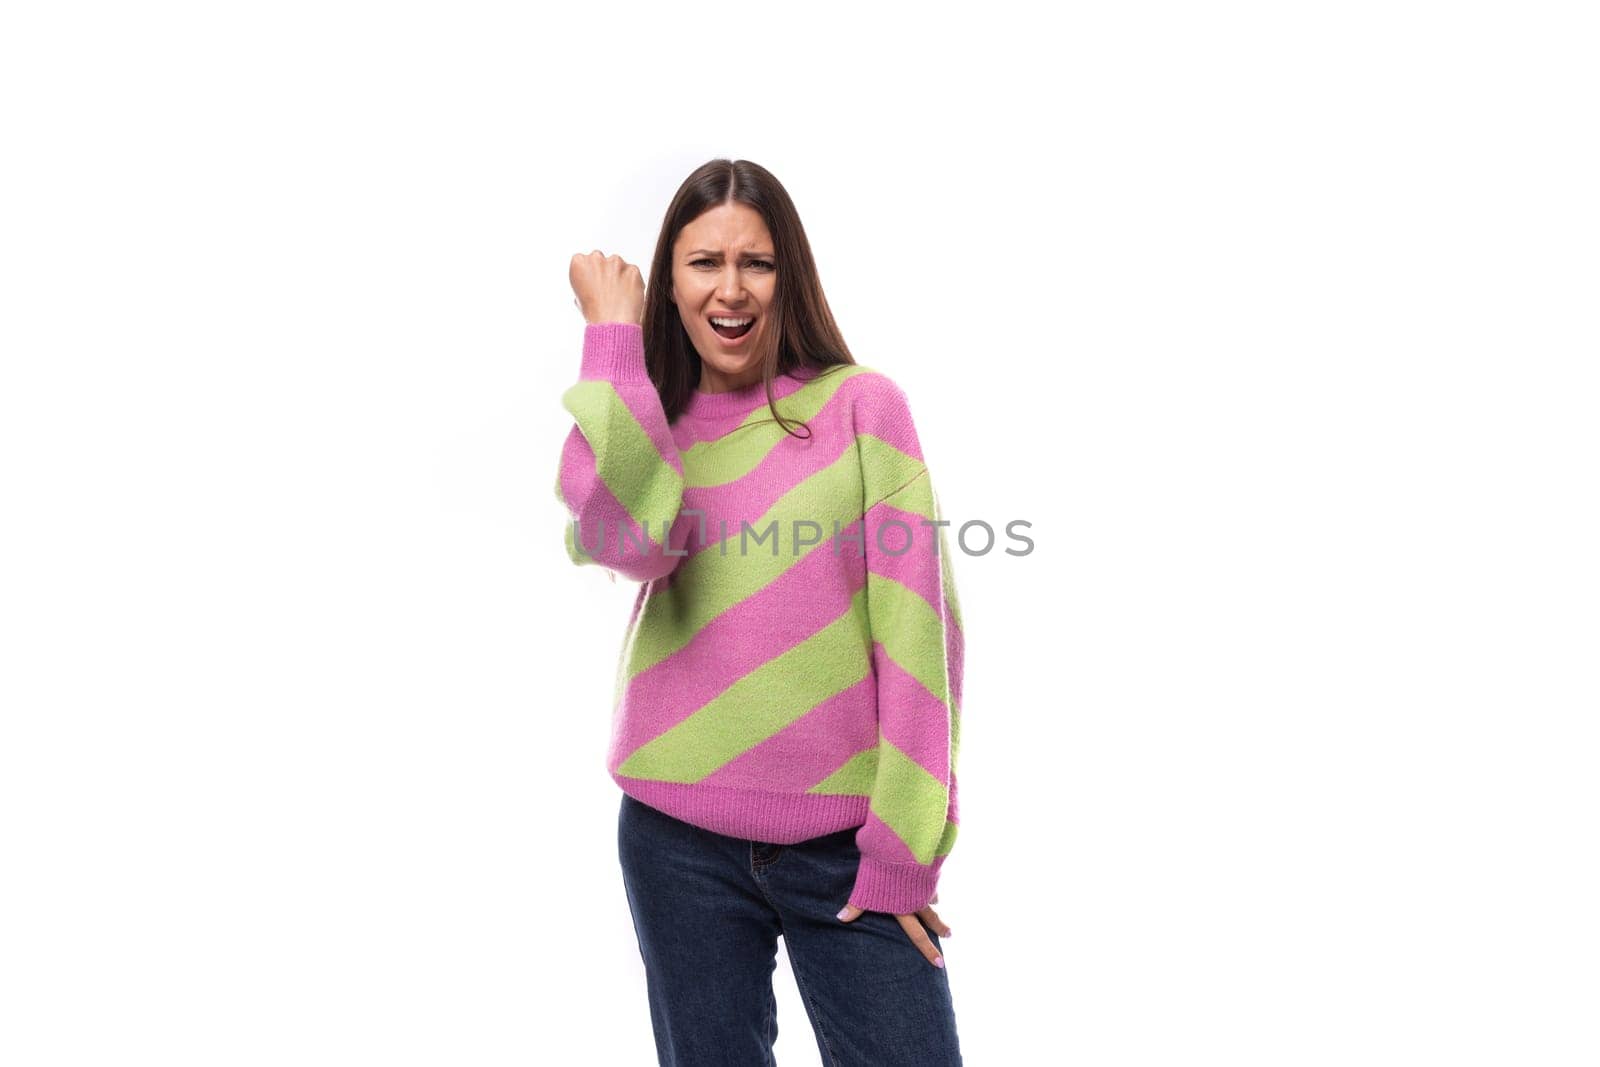 young happy caucasian woman with straight black hair is dressed in a stylish striped pink pullover.